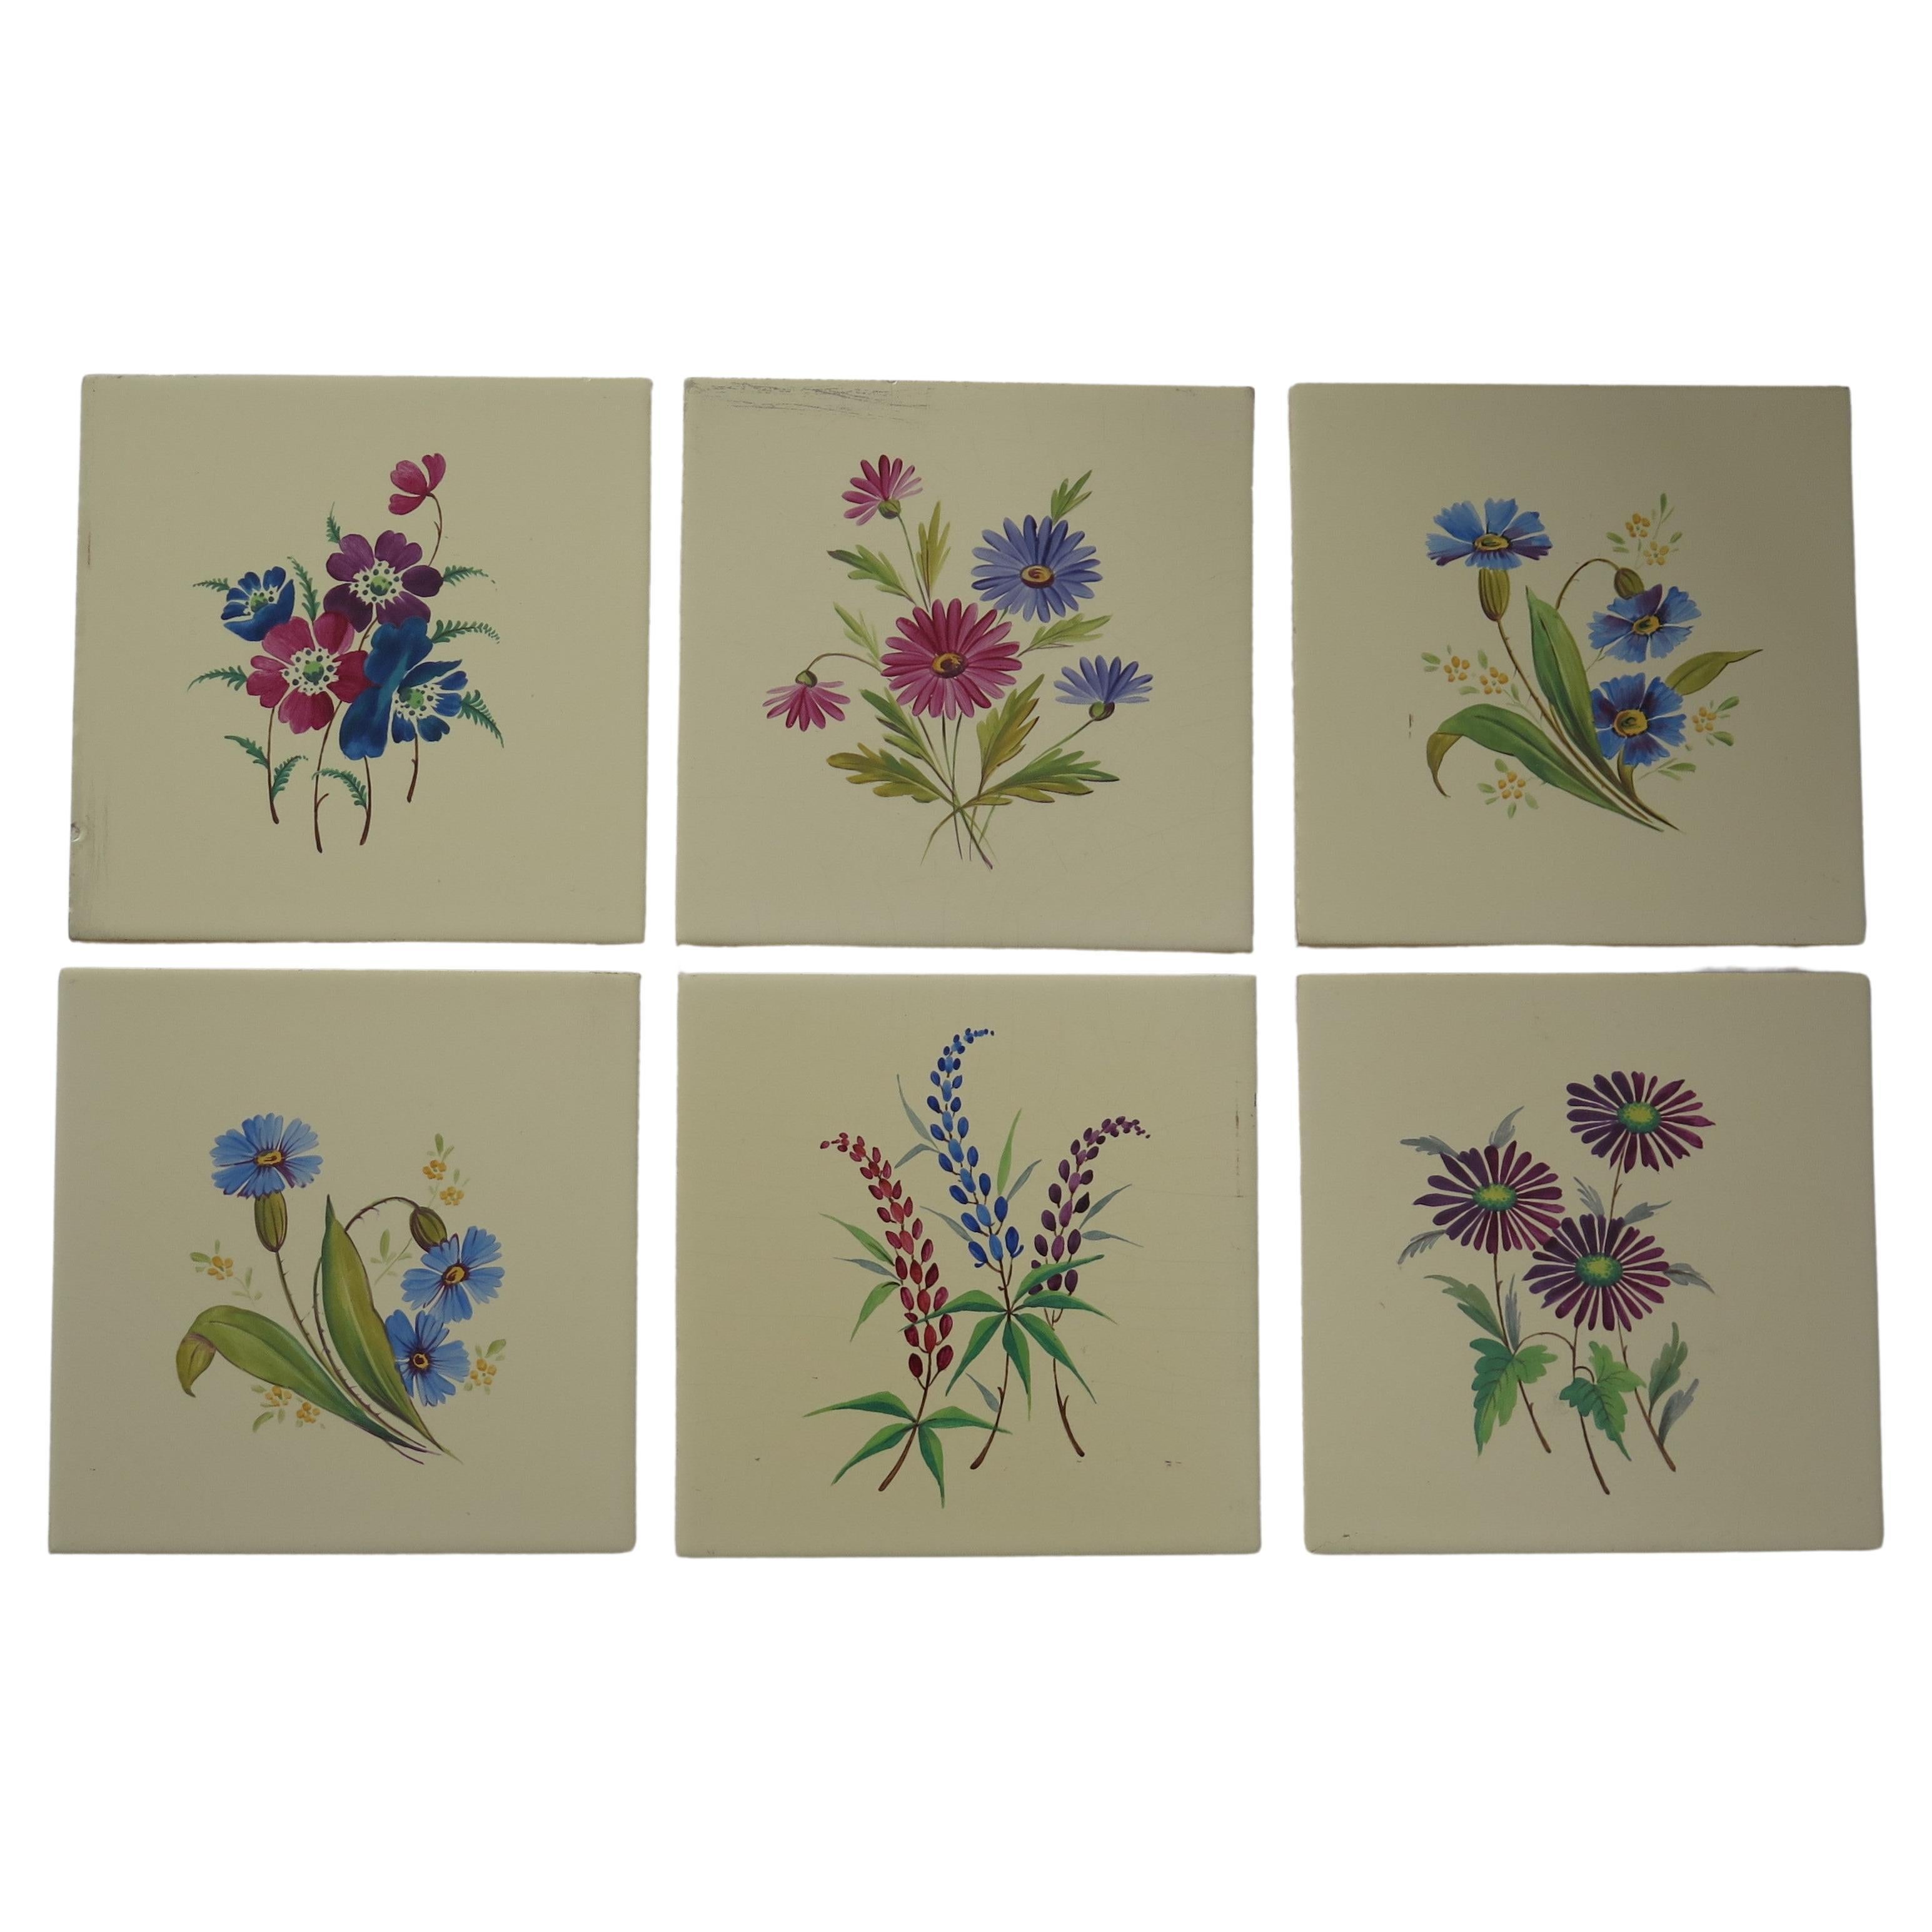 These are a good set of SIX glazed ceramic wall tiles, hand enamelled with individual flowers and dating to the early 20th century, circa 1920. 
The tiles were made by The Campbell Tile Co. of Stoke, Staffordshire 

Each tile is nominally 6 inches (